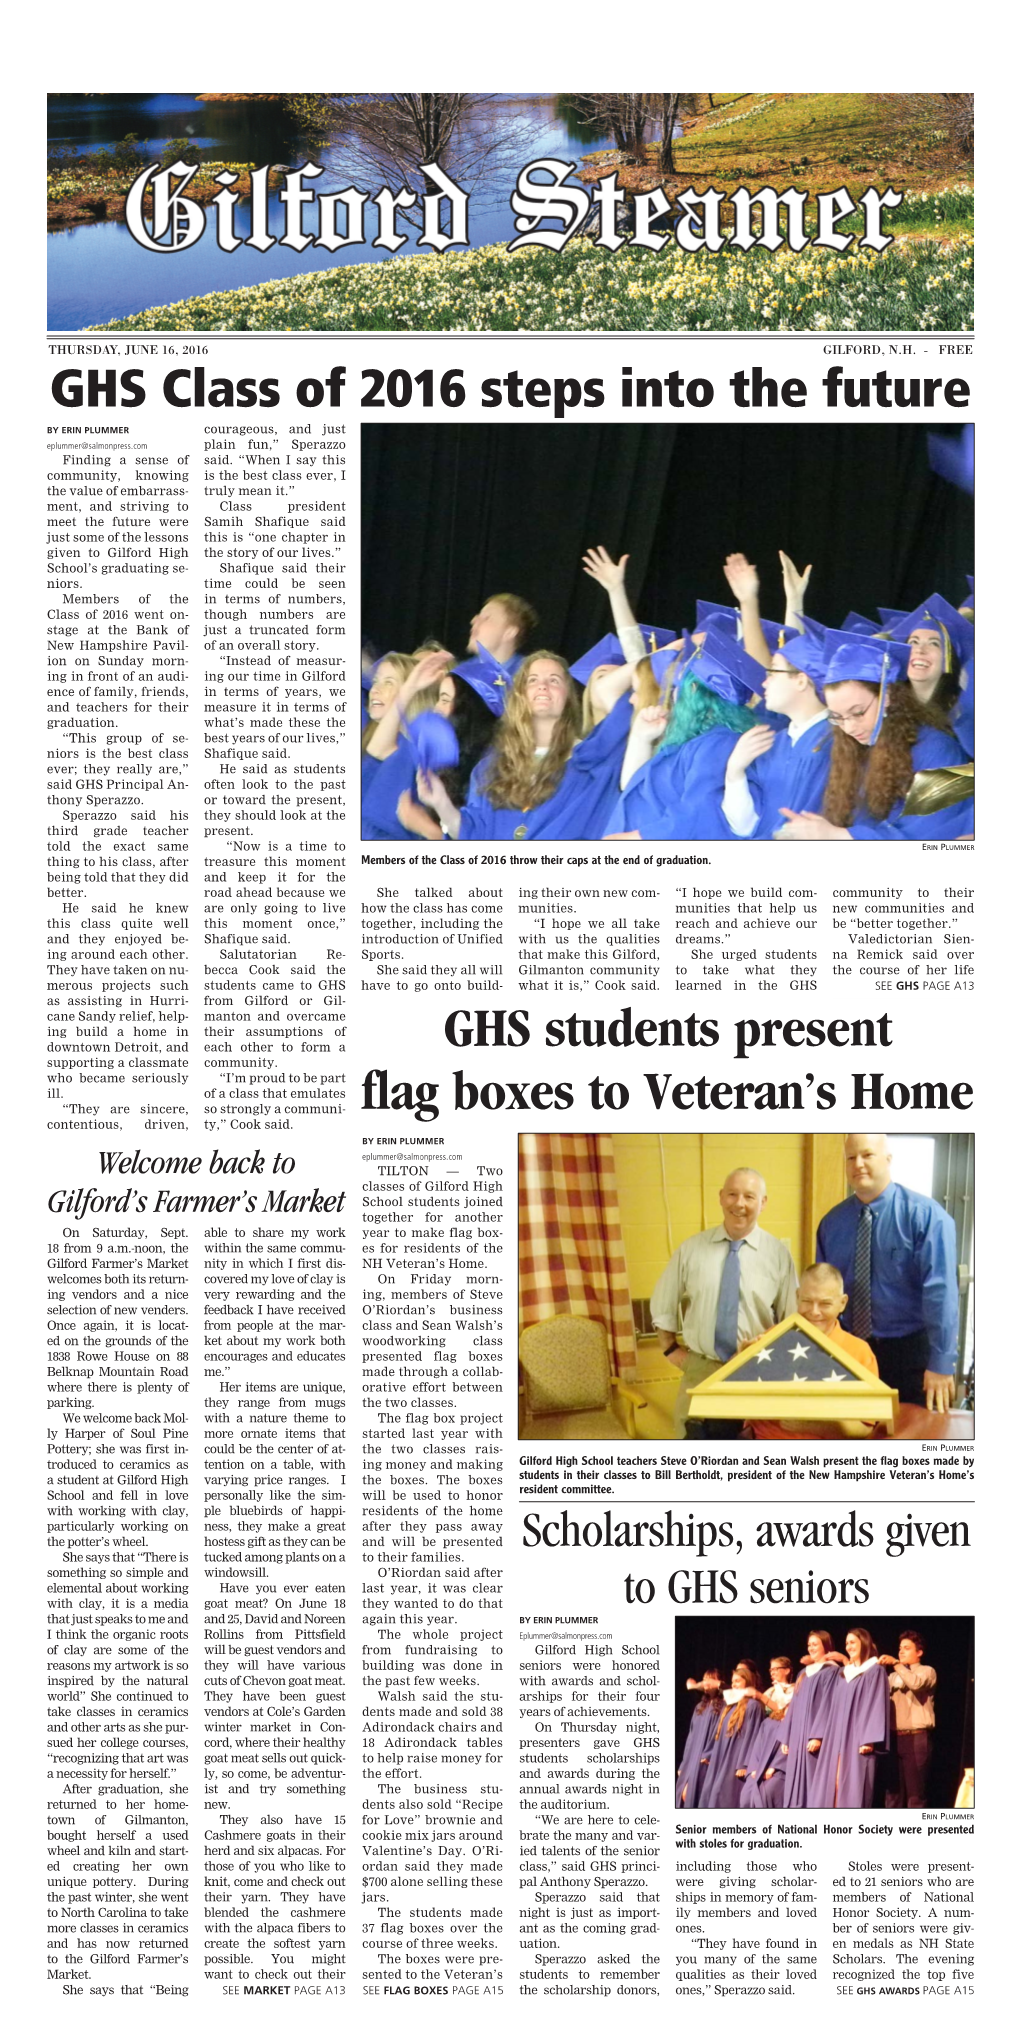 GHS Students Present Flag Boxes to Veteran's Home